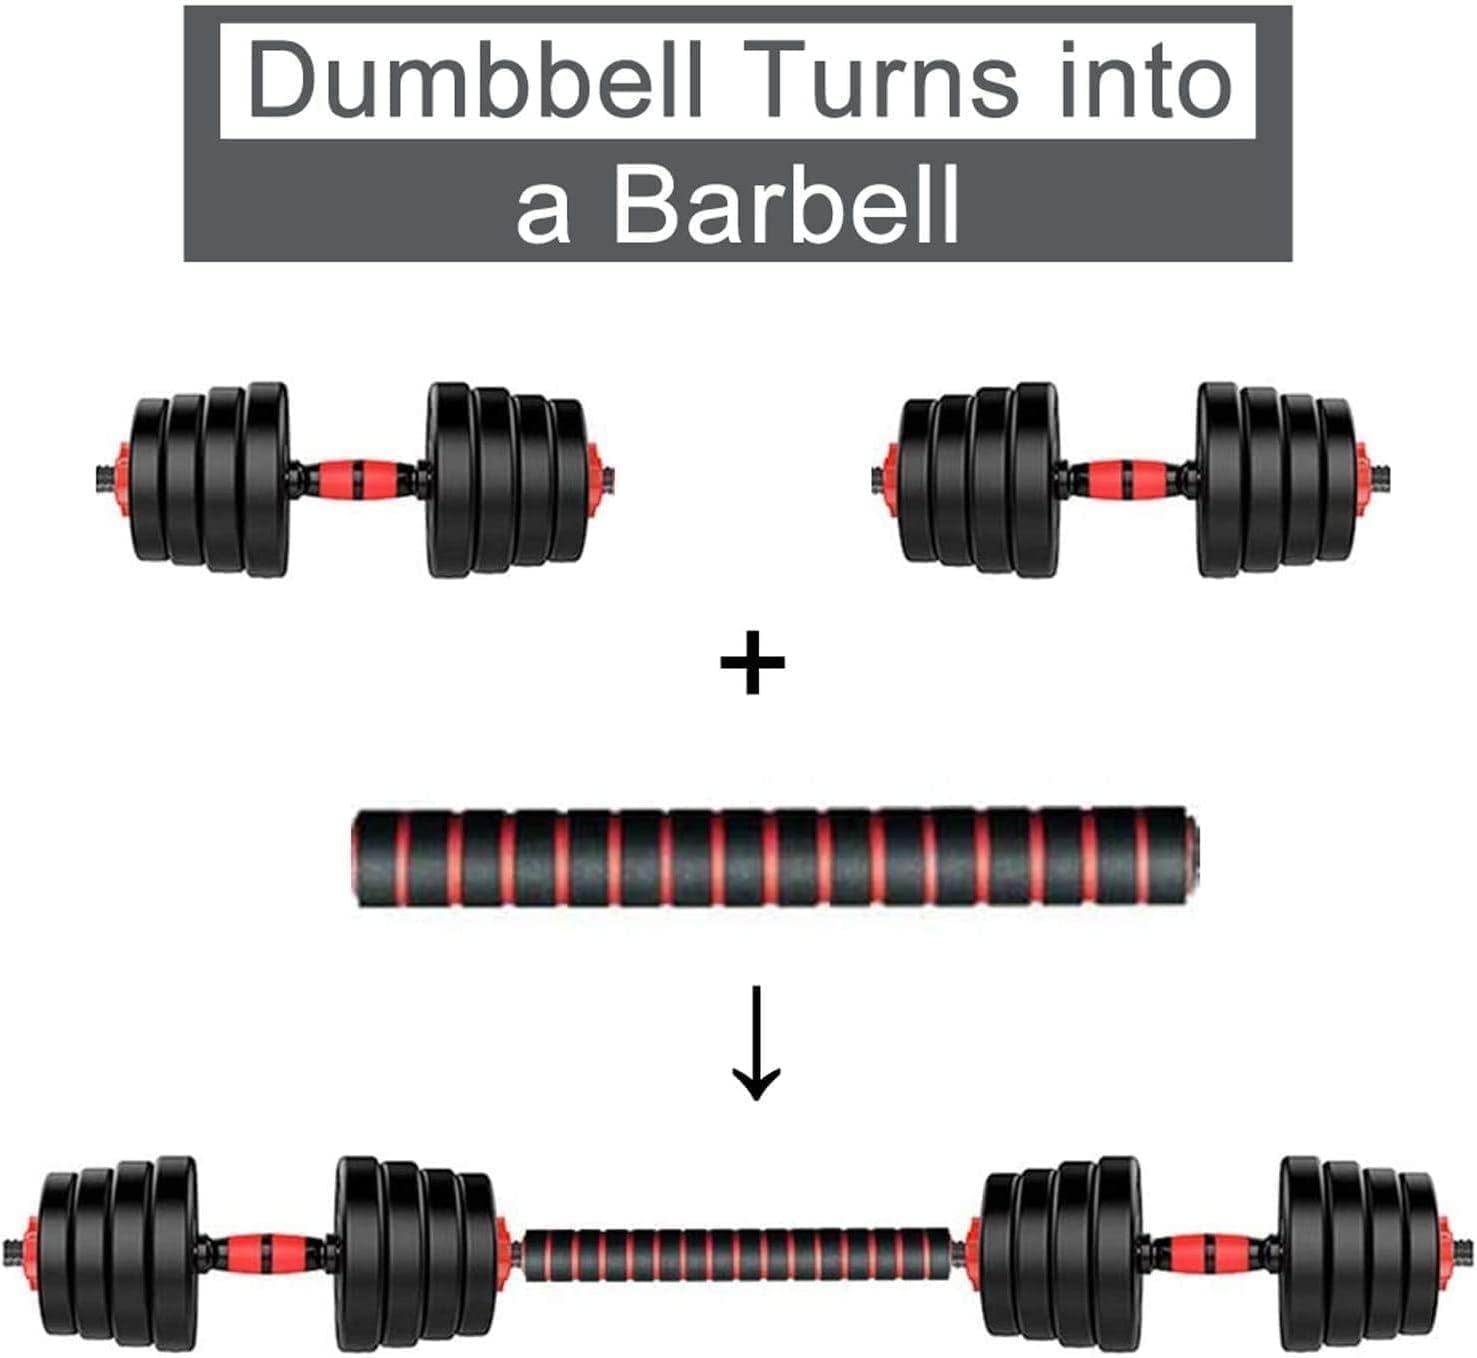 e World Adjustable Dumbbells Weight Set – 10 Kg Dumbbell Weight with Connecting Rod Used As Barbell, for Men and Women Home Gym Work Out Training Fitness Equipment for All-Purpose.